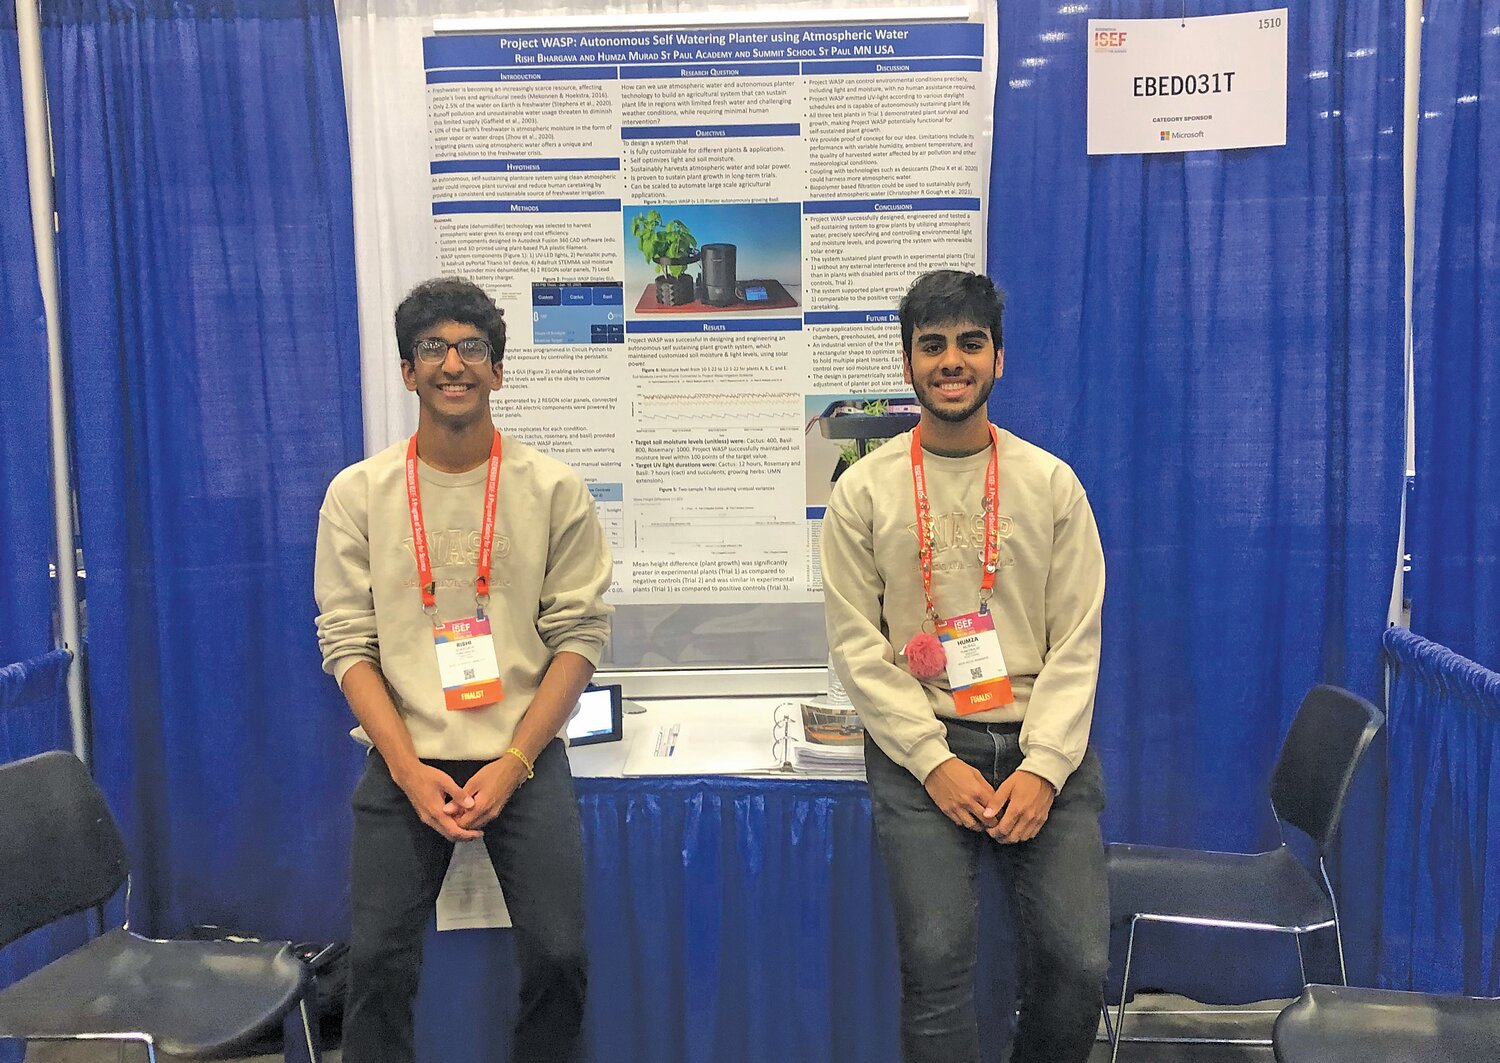 St. Paul Academy students Rishi Bhargava (left) and Humza Murad were two of five students chosen at the Minnesota State Science & Engineering Fair to compete at the expense-paid International Science & Engineering Fair (ISEF) in Dallas, Texas in May 2023.